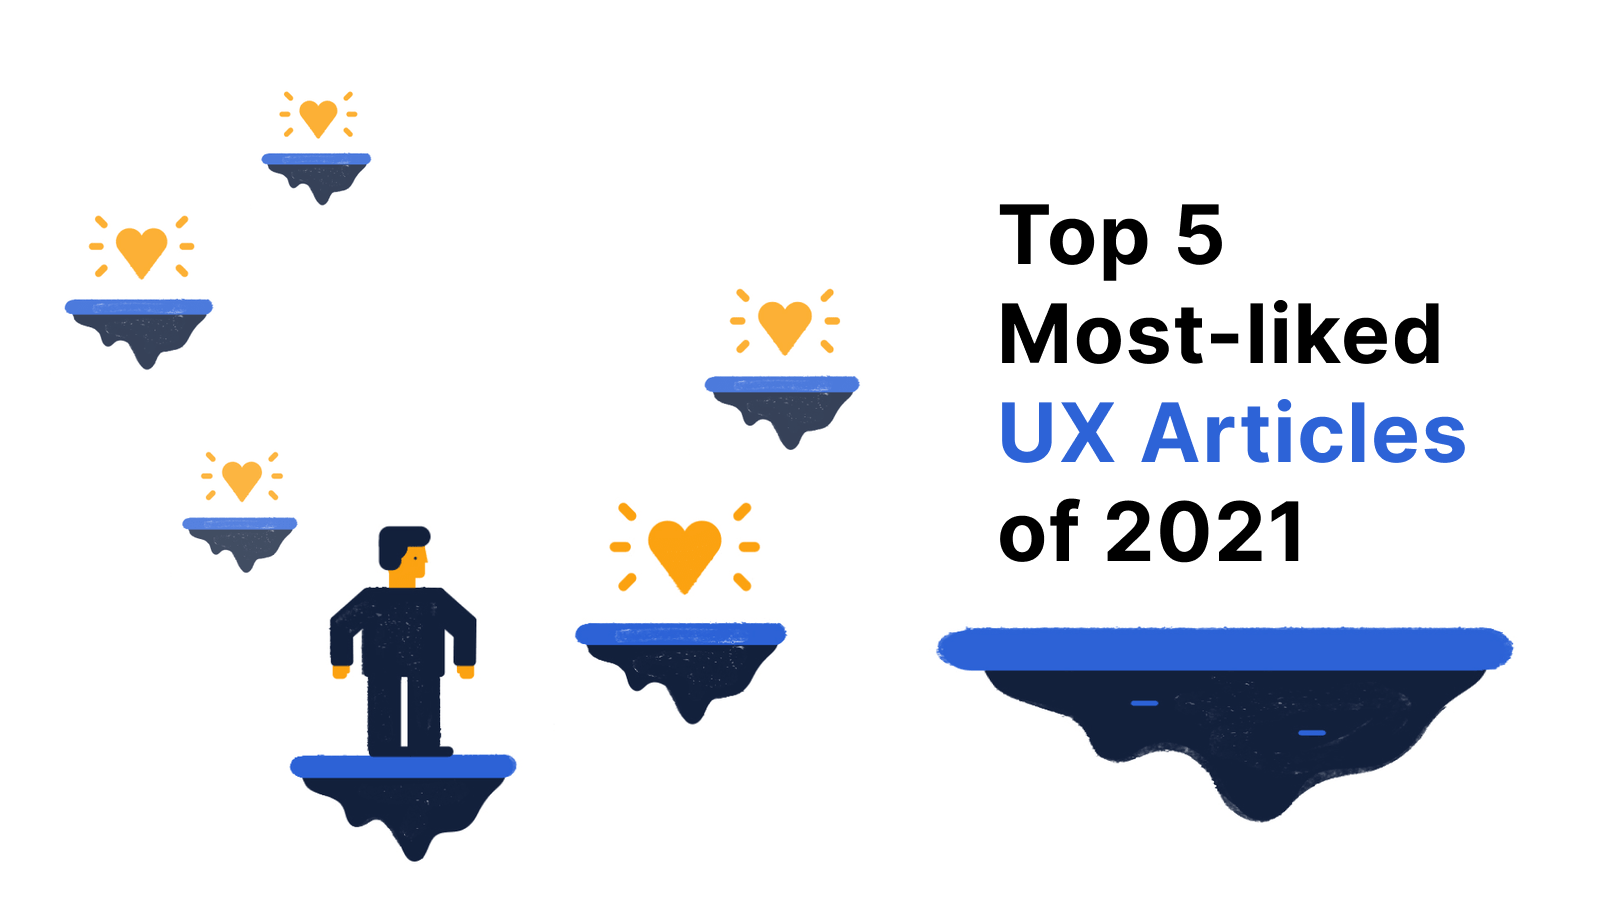 Top UX Articles You Liked Most in 2021